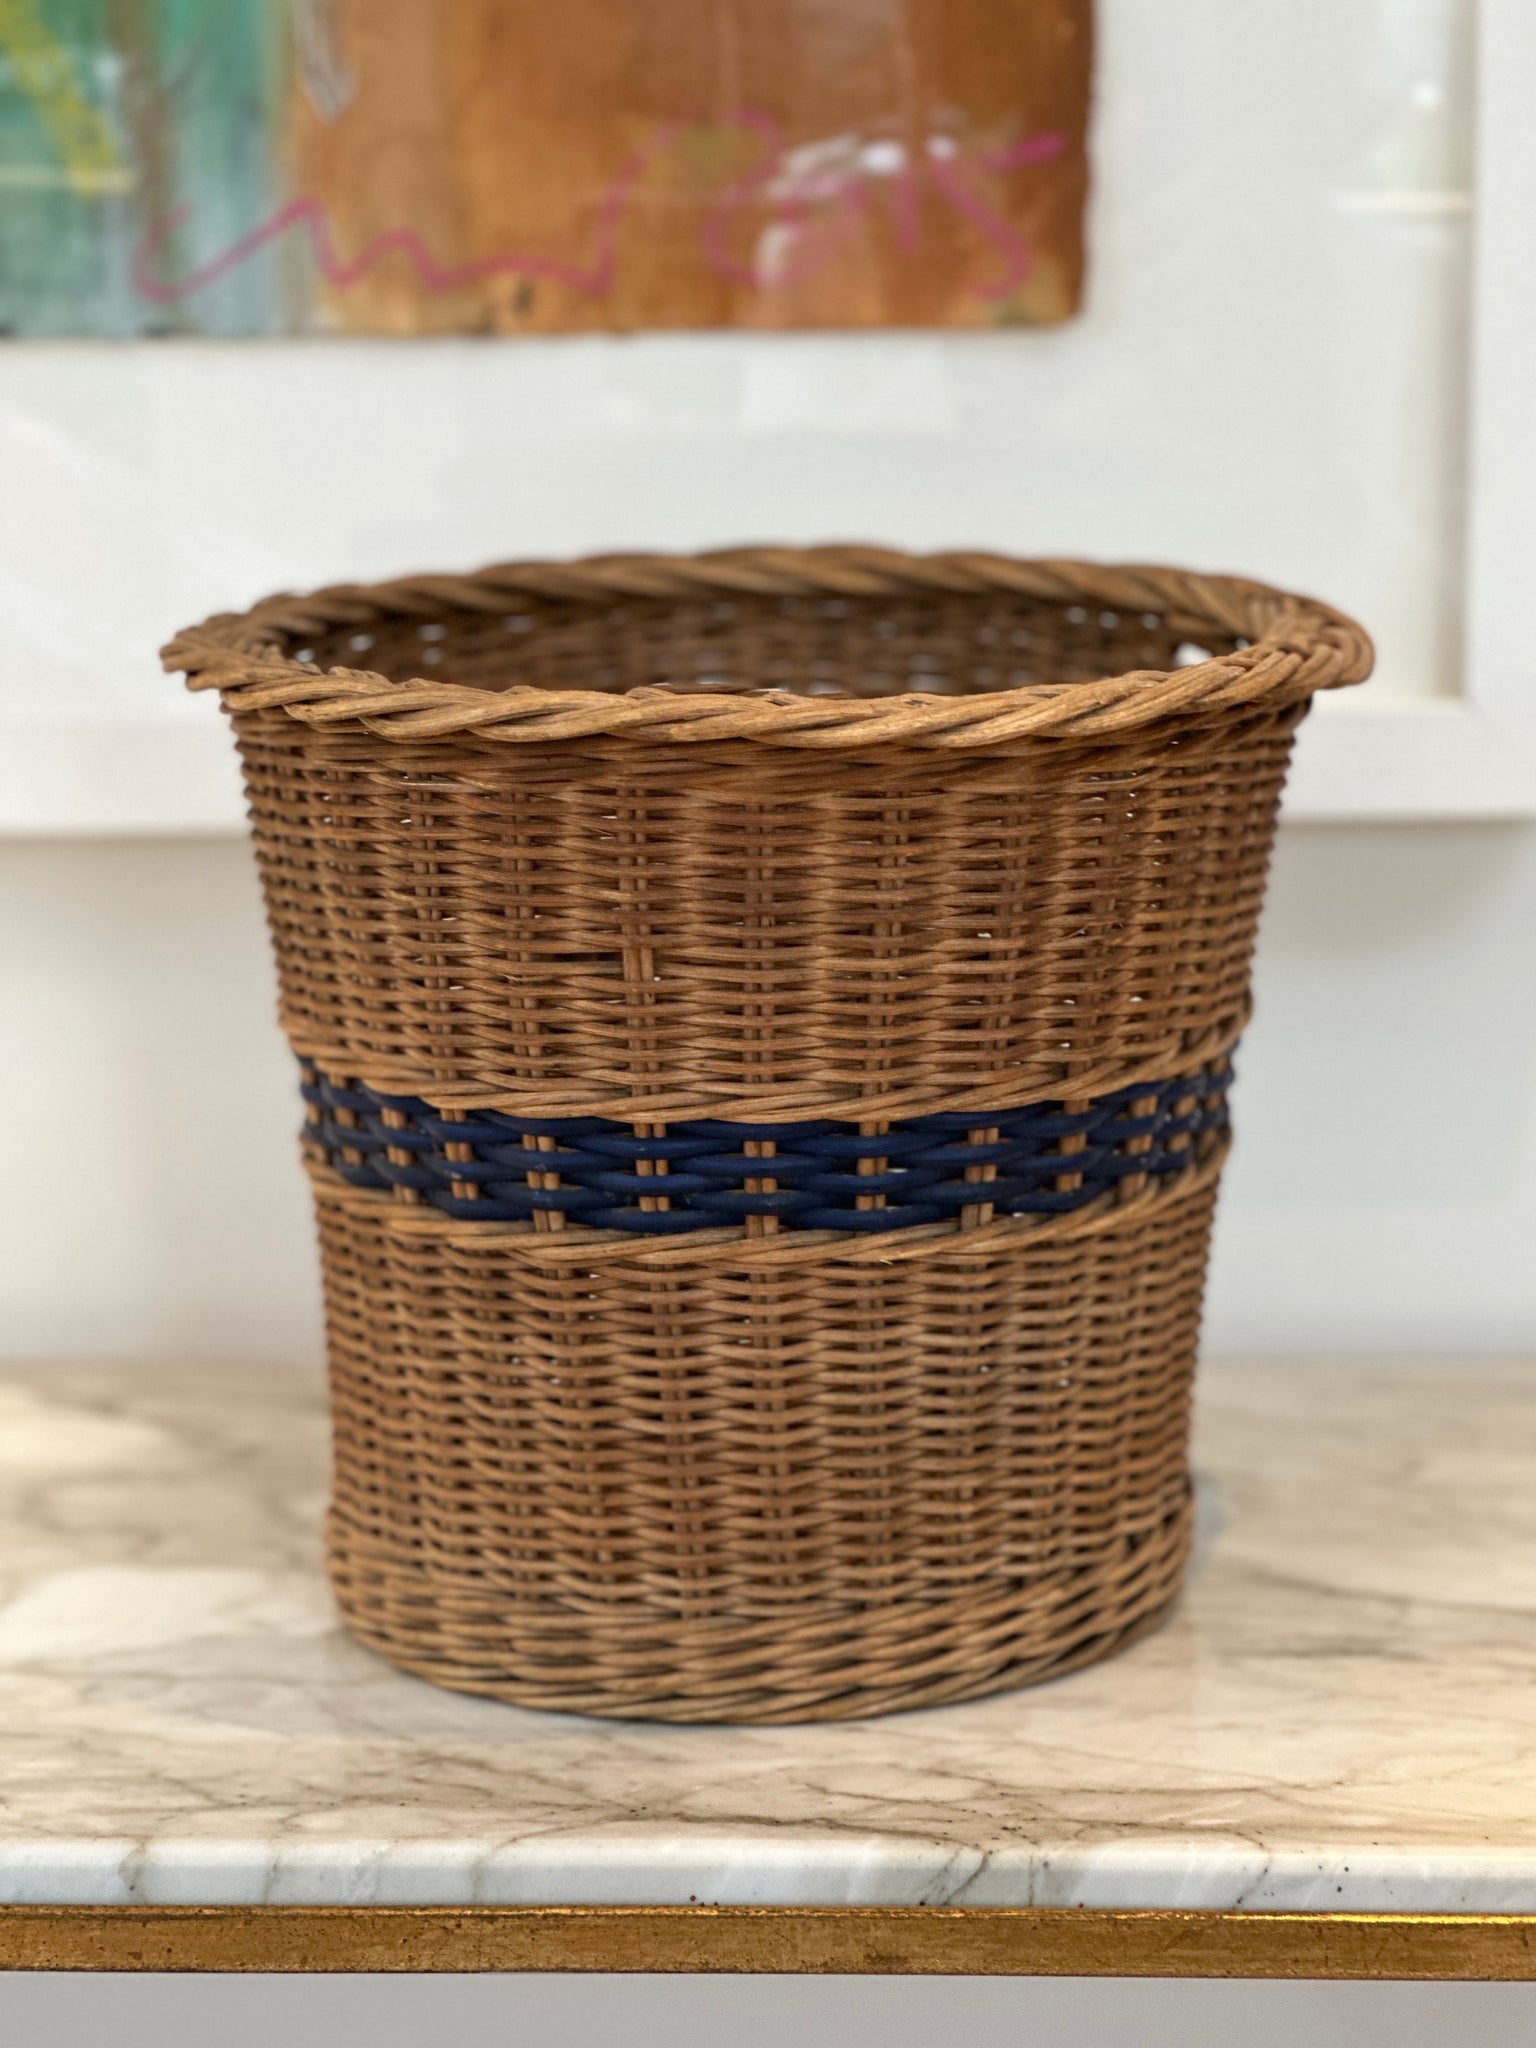 Wicker Planter with Blue Accents